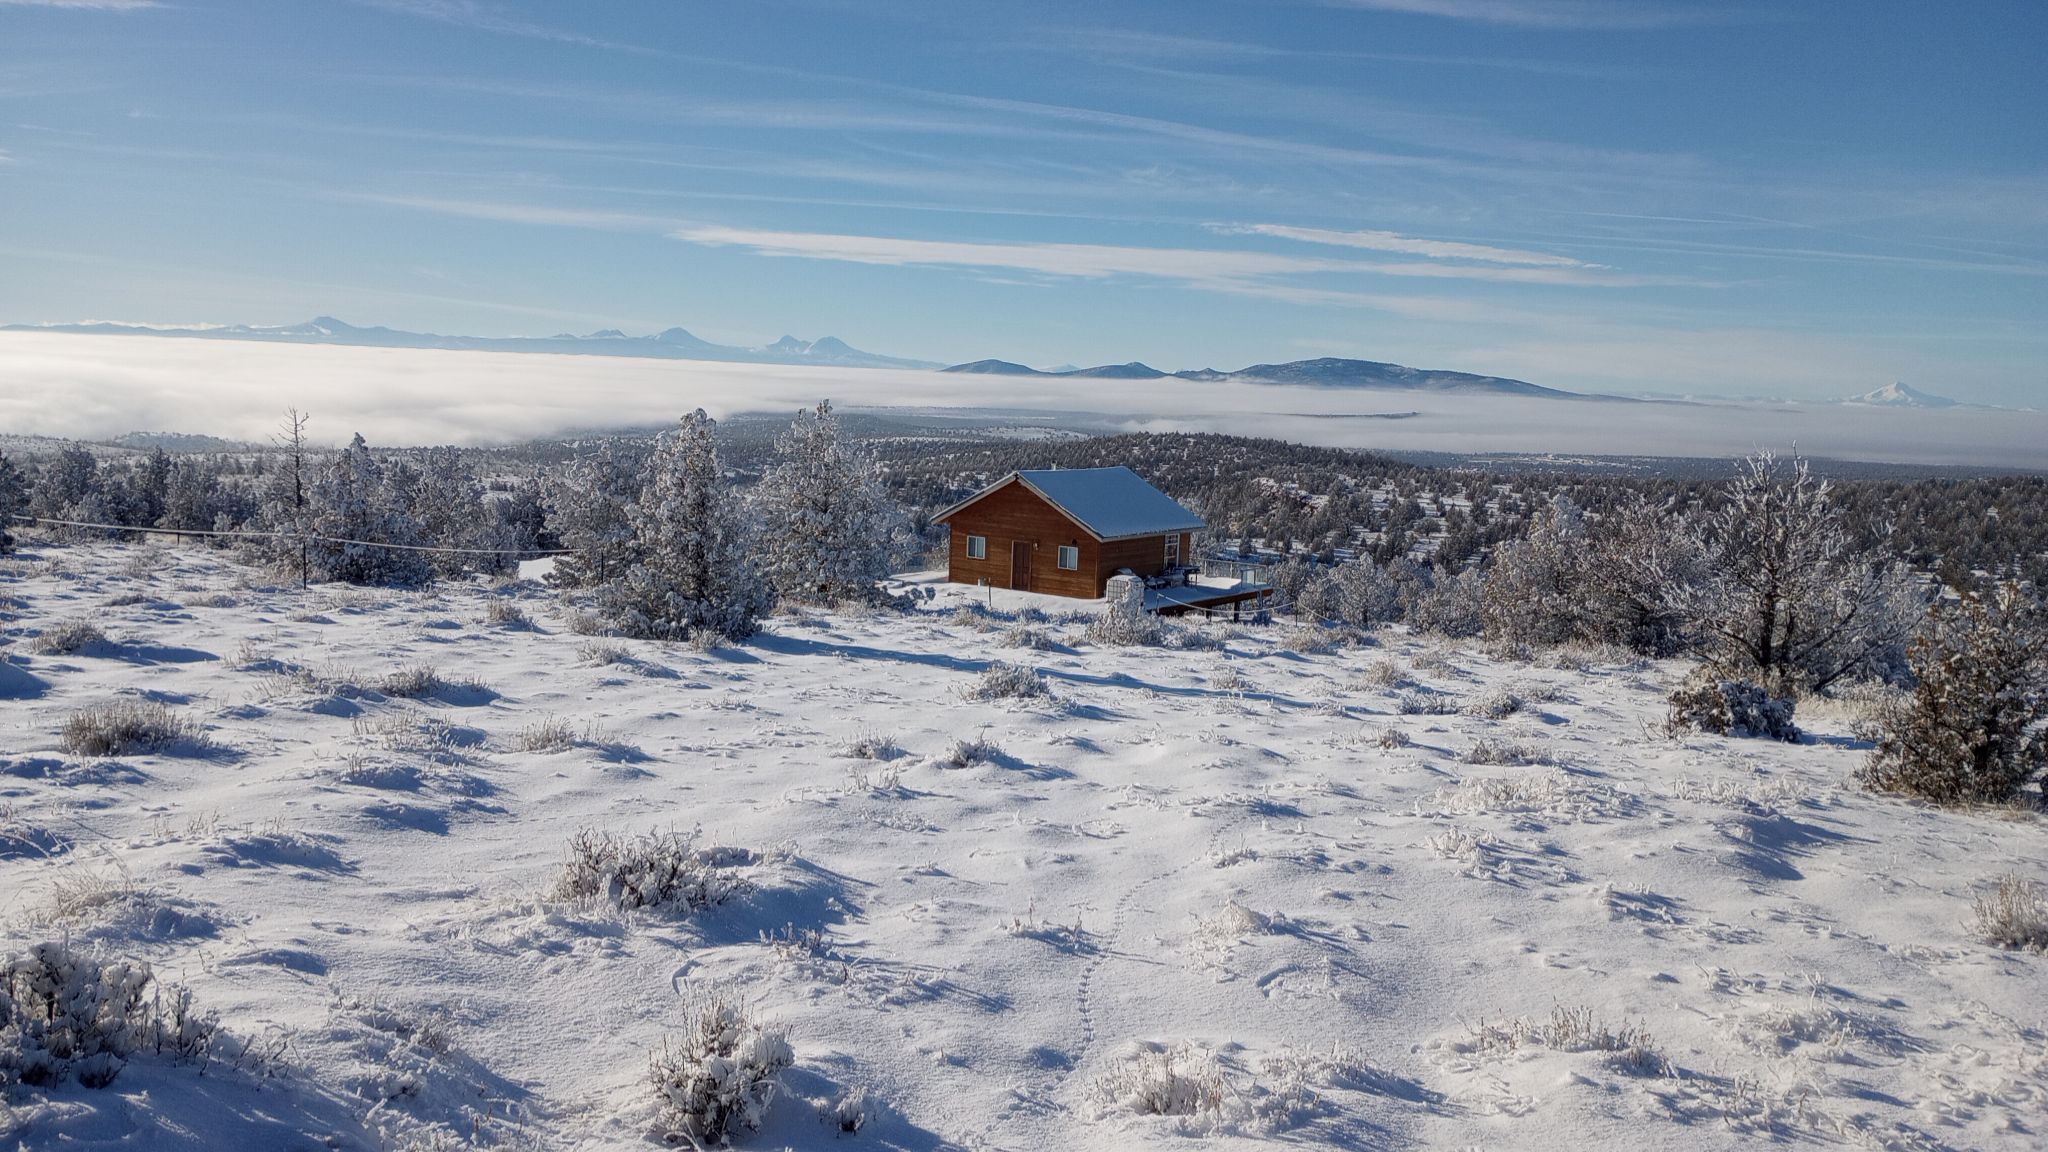 Community photo by Craig McConnell | Prineville, OR, USA